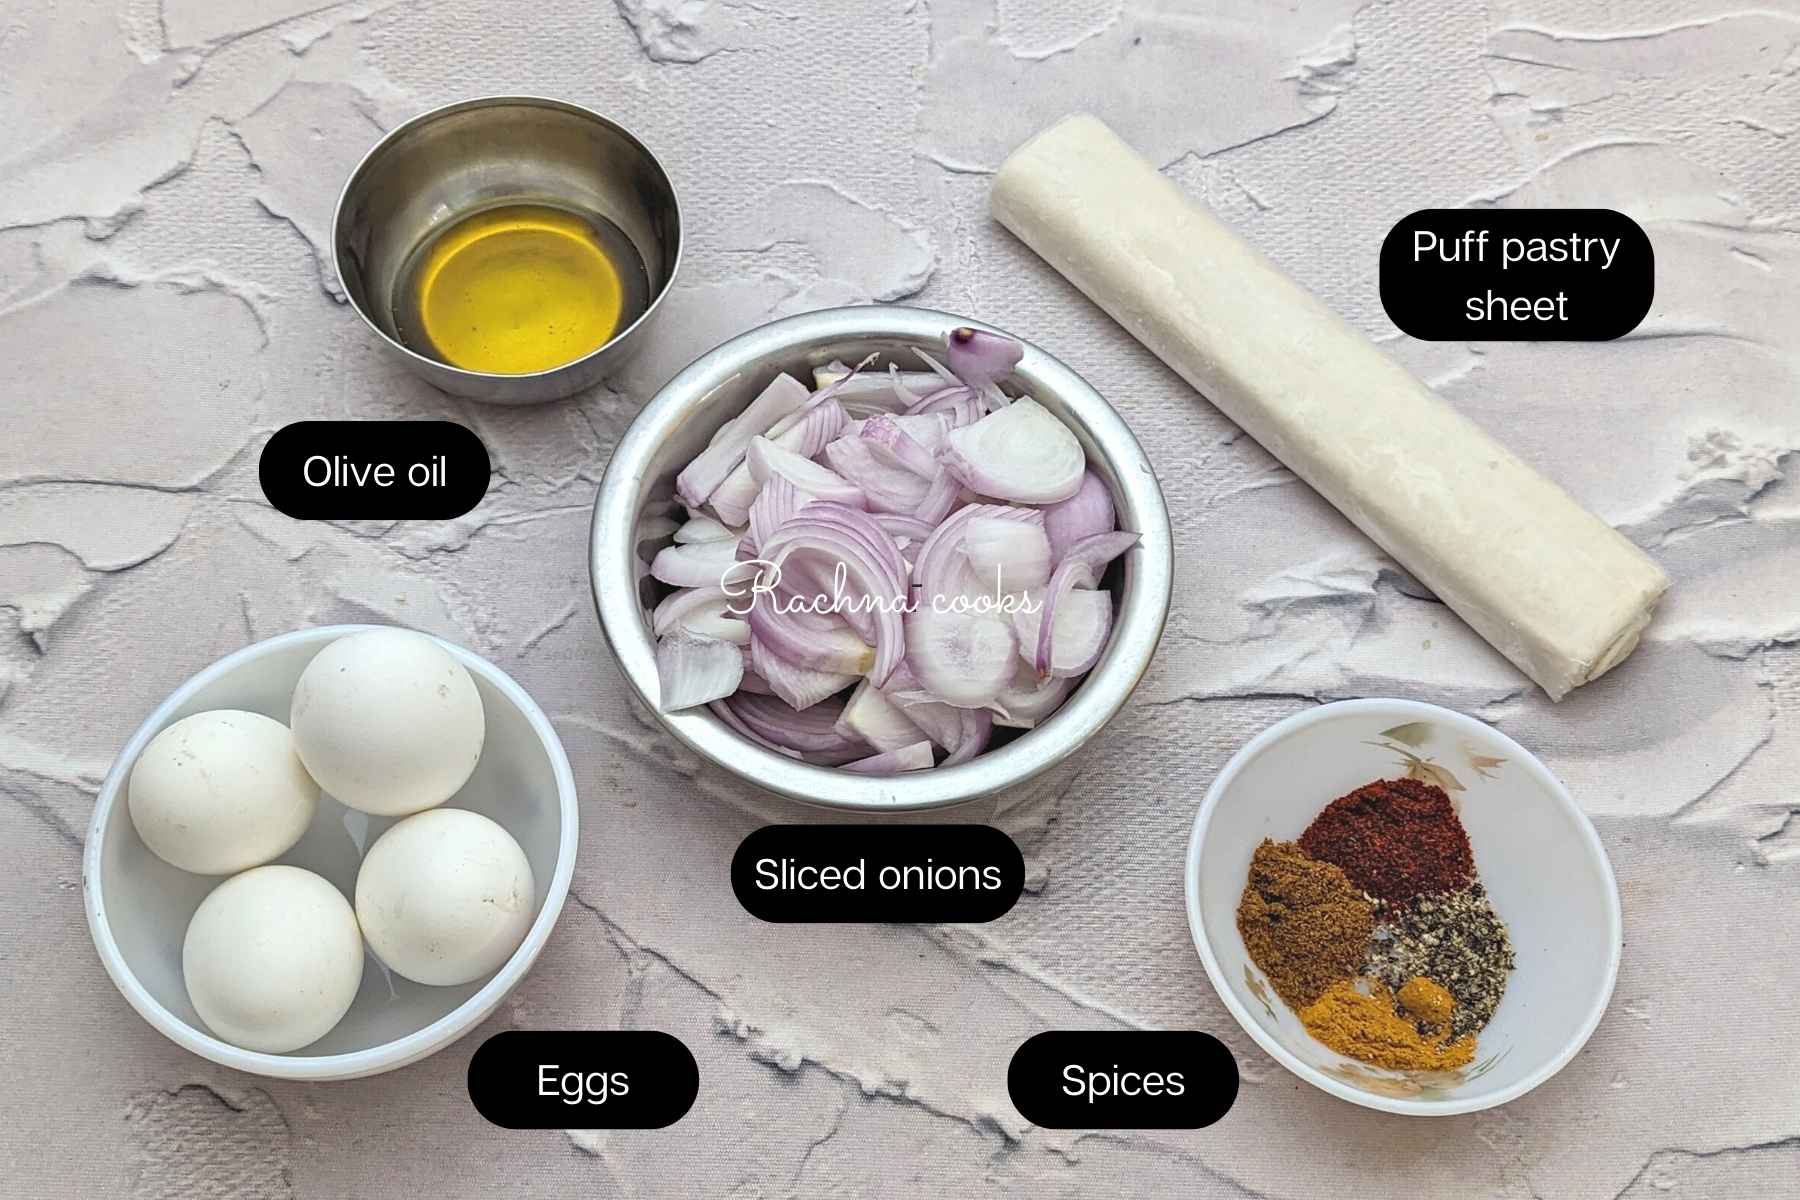 Ingredients for making air fryer egg puffs including sliced onions, boiled eggs, puff pastry sheets, spices and olive oil